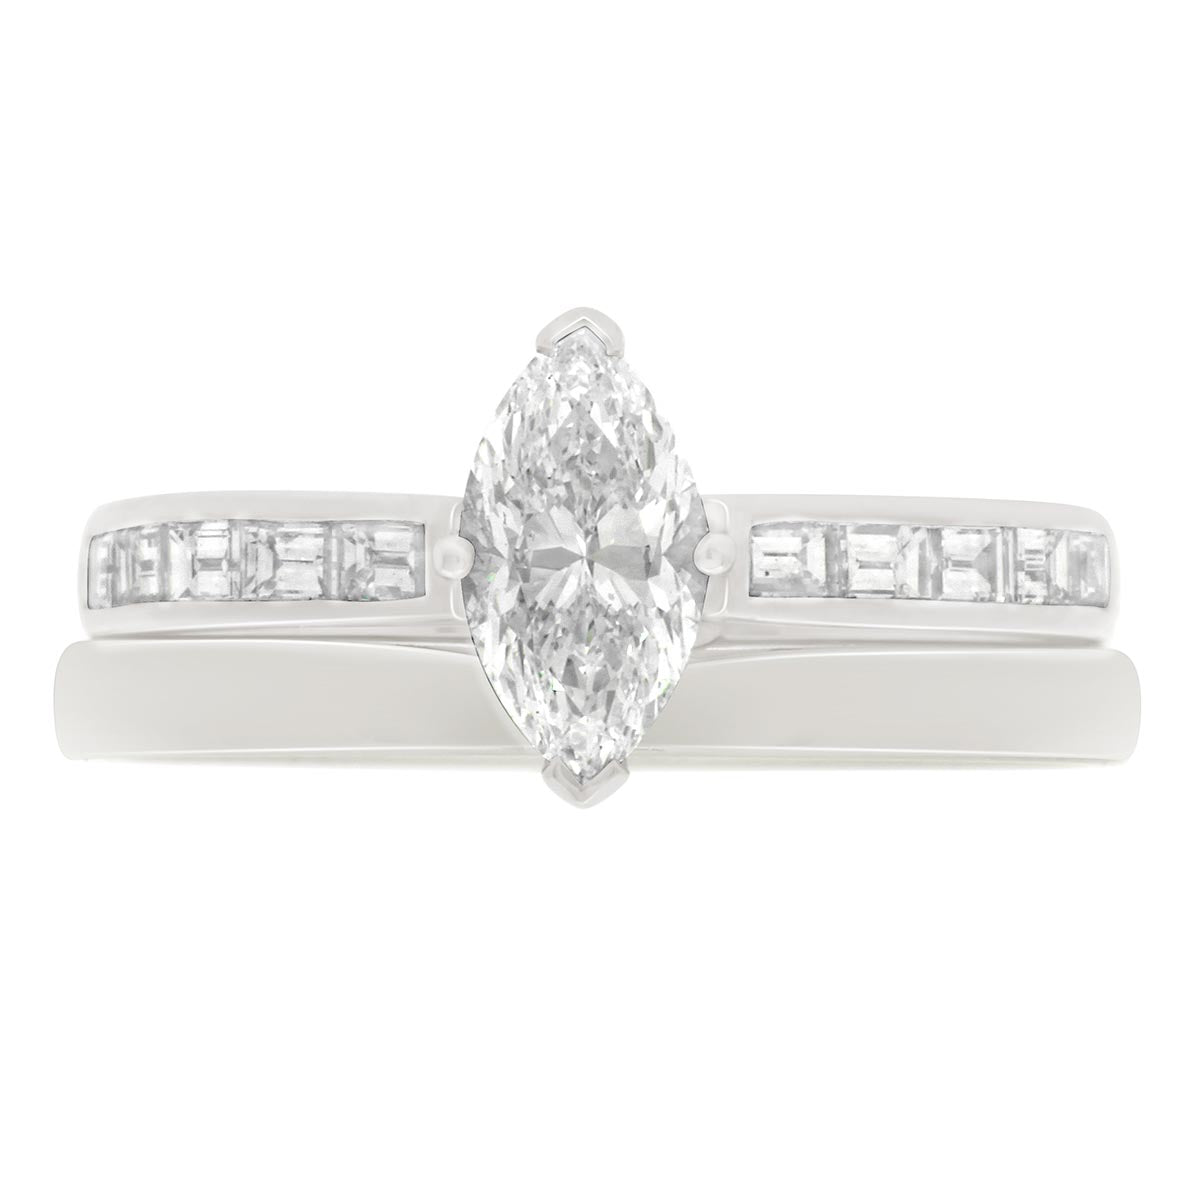 Marquise Diamond Ring made with Platinum pictured with a plain wedding ring